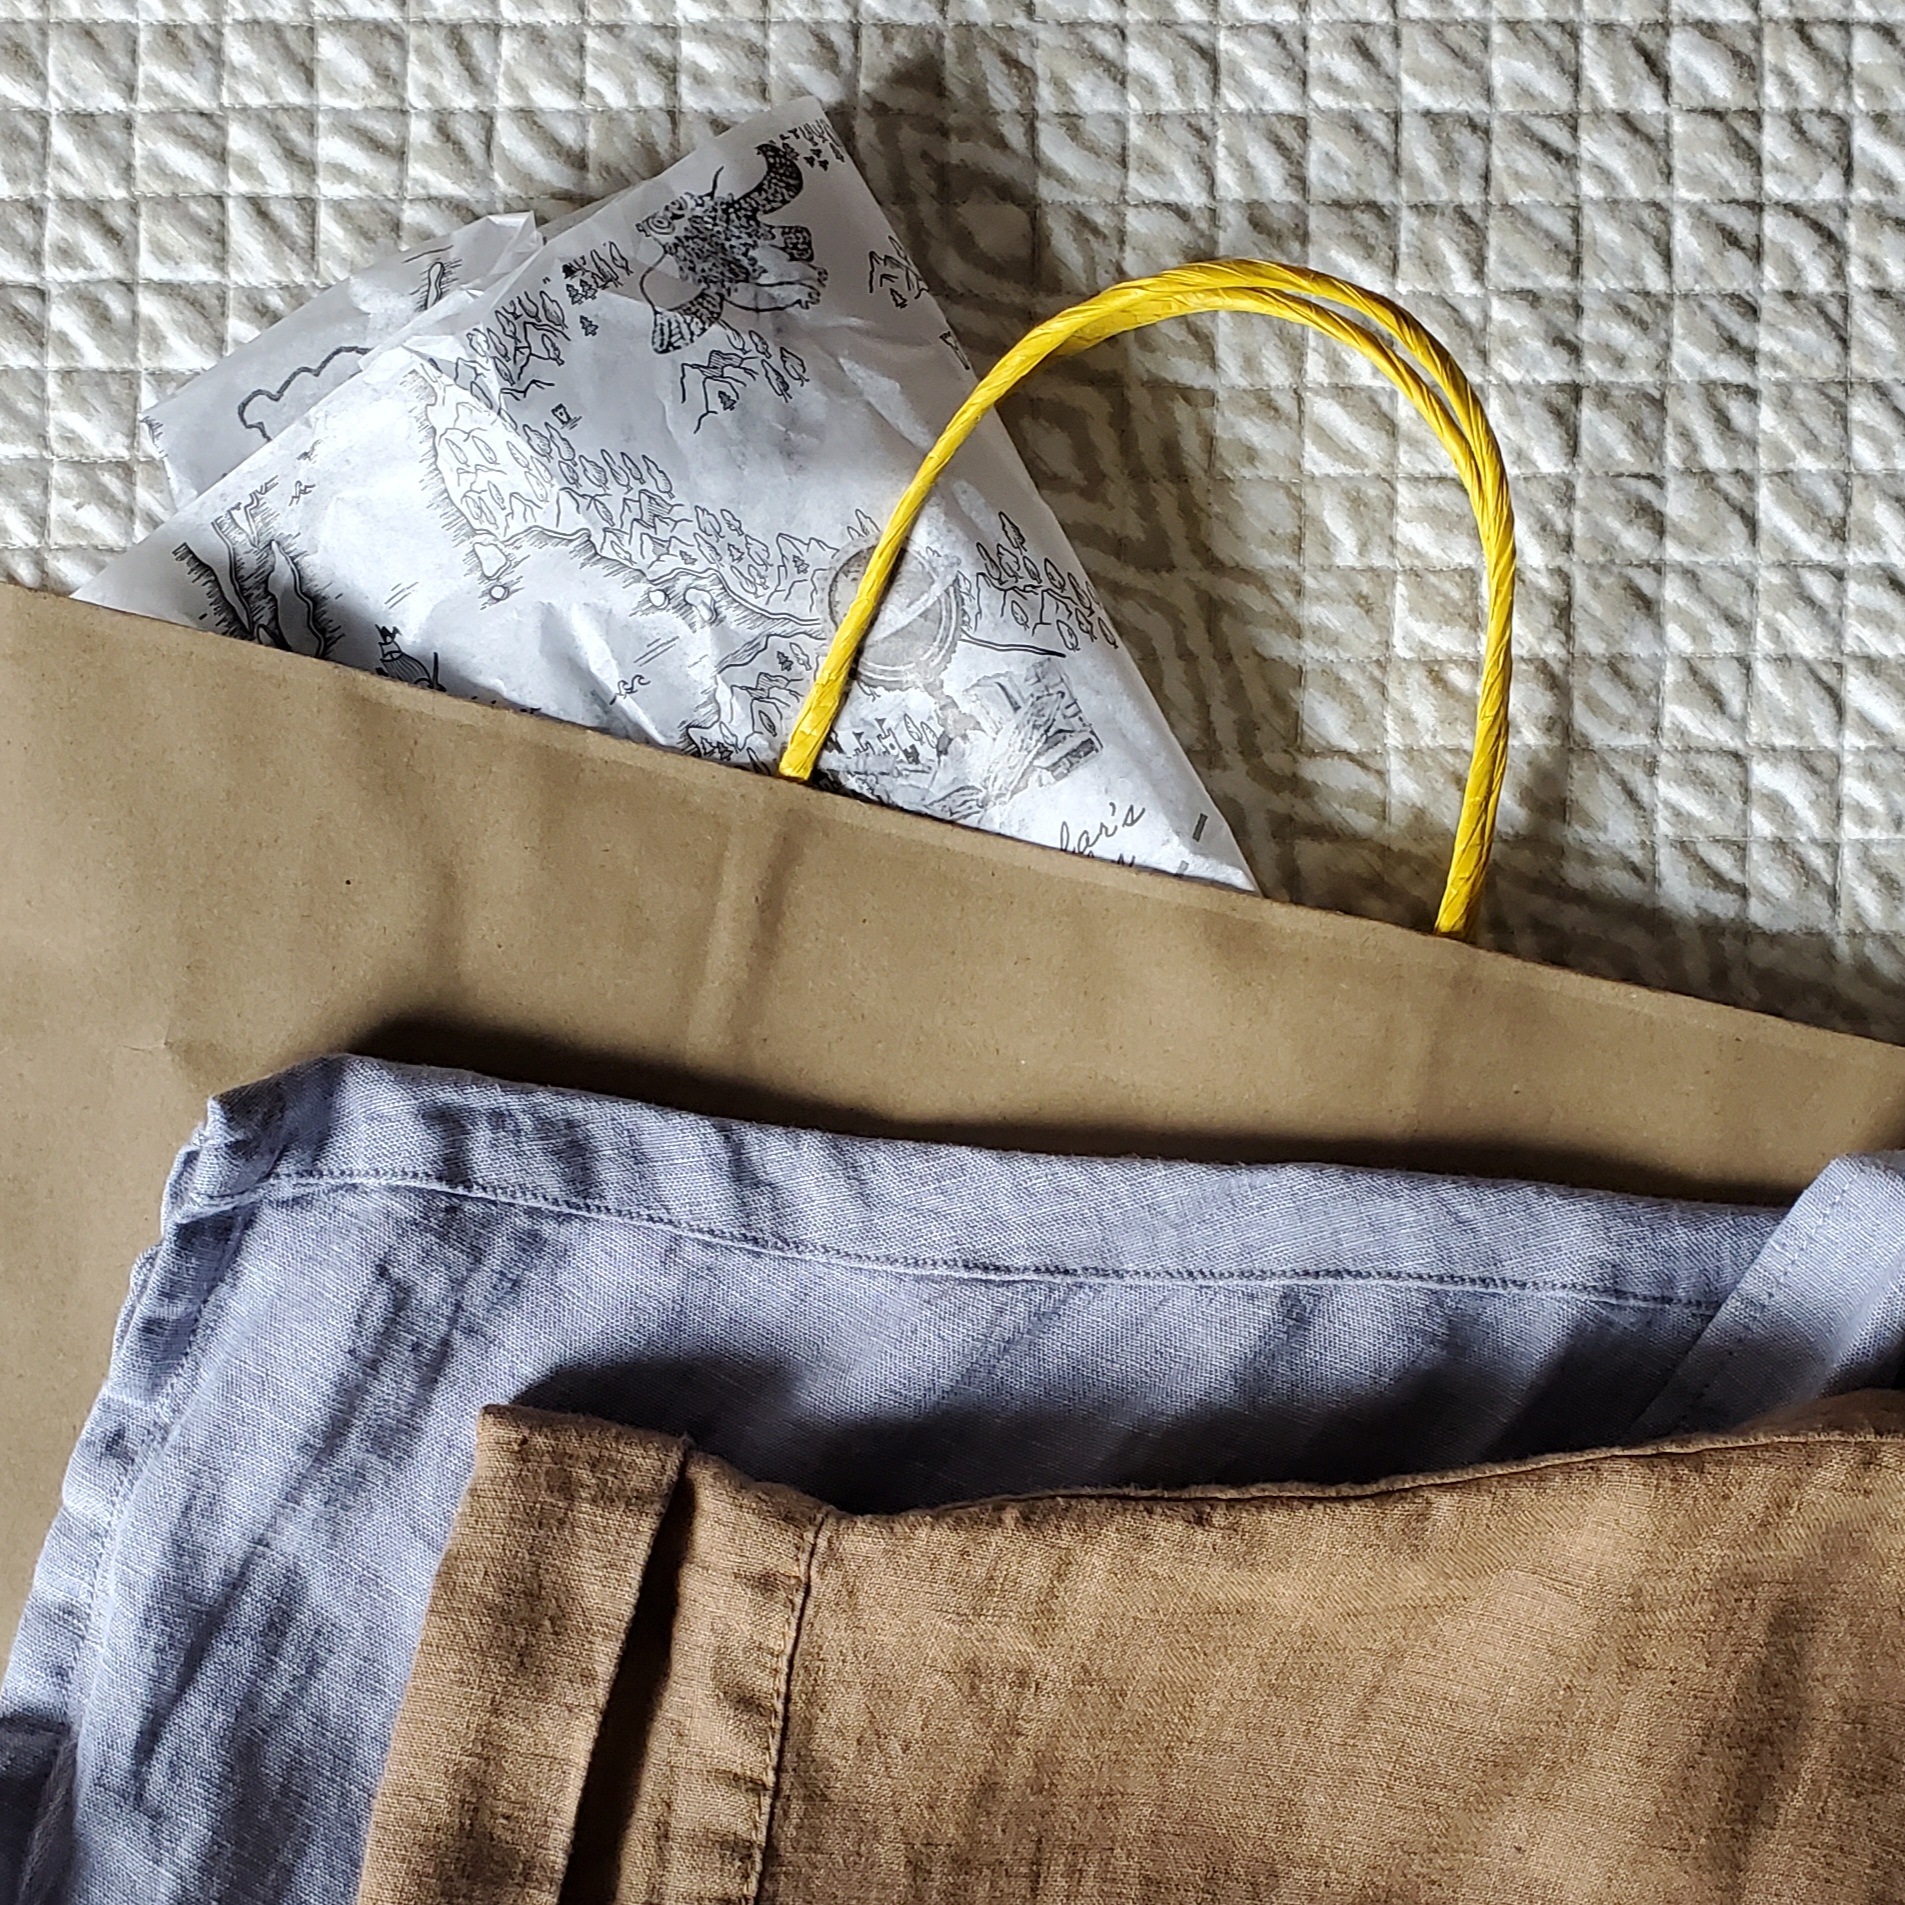 A brown paper shopping bag and clothing.